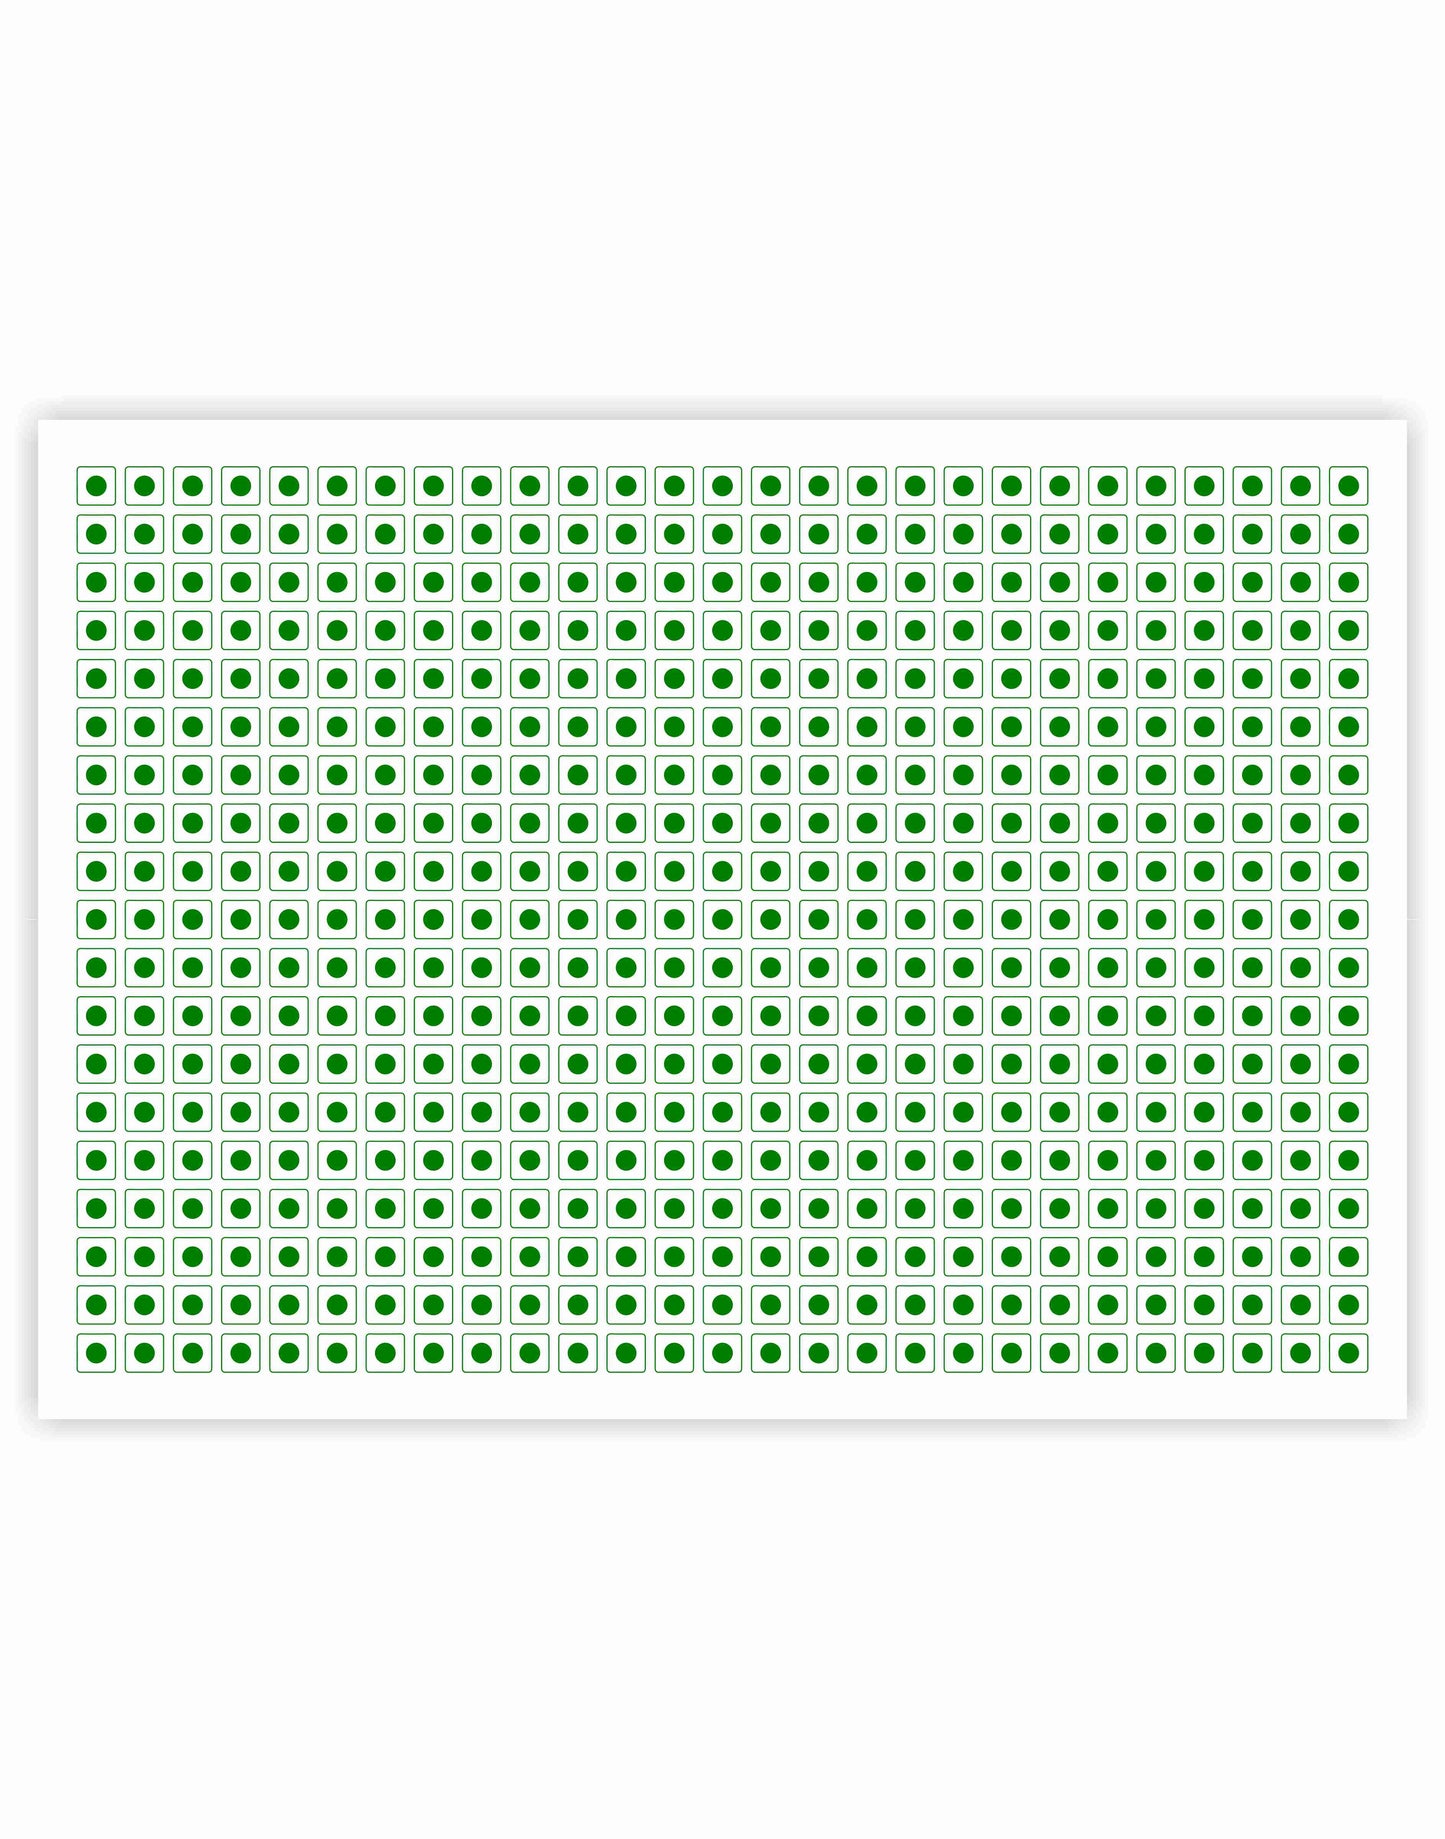 iberry's Self Adhensive 540 Veg Stickers Green for Food Packaging|Size 10 x 10 mm| Food Label Stickers